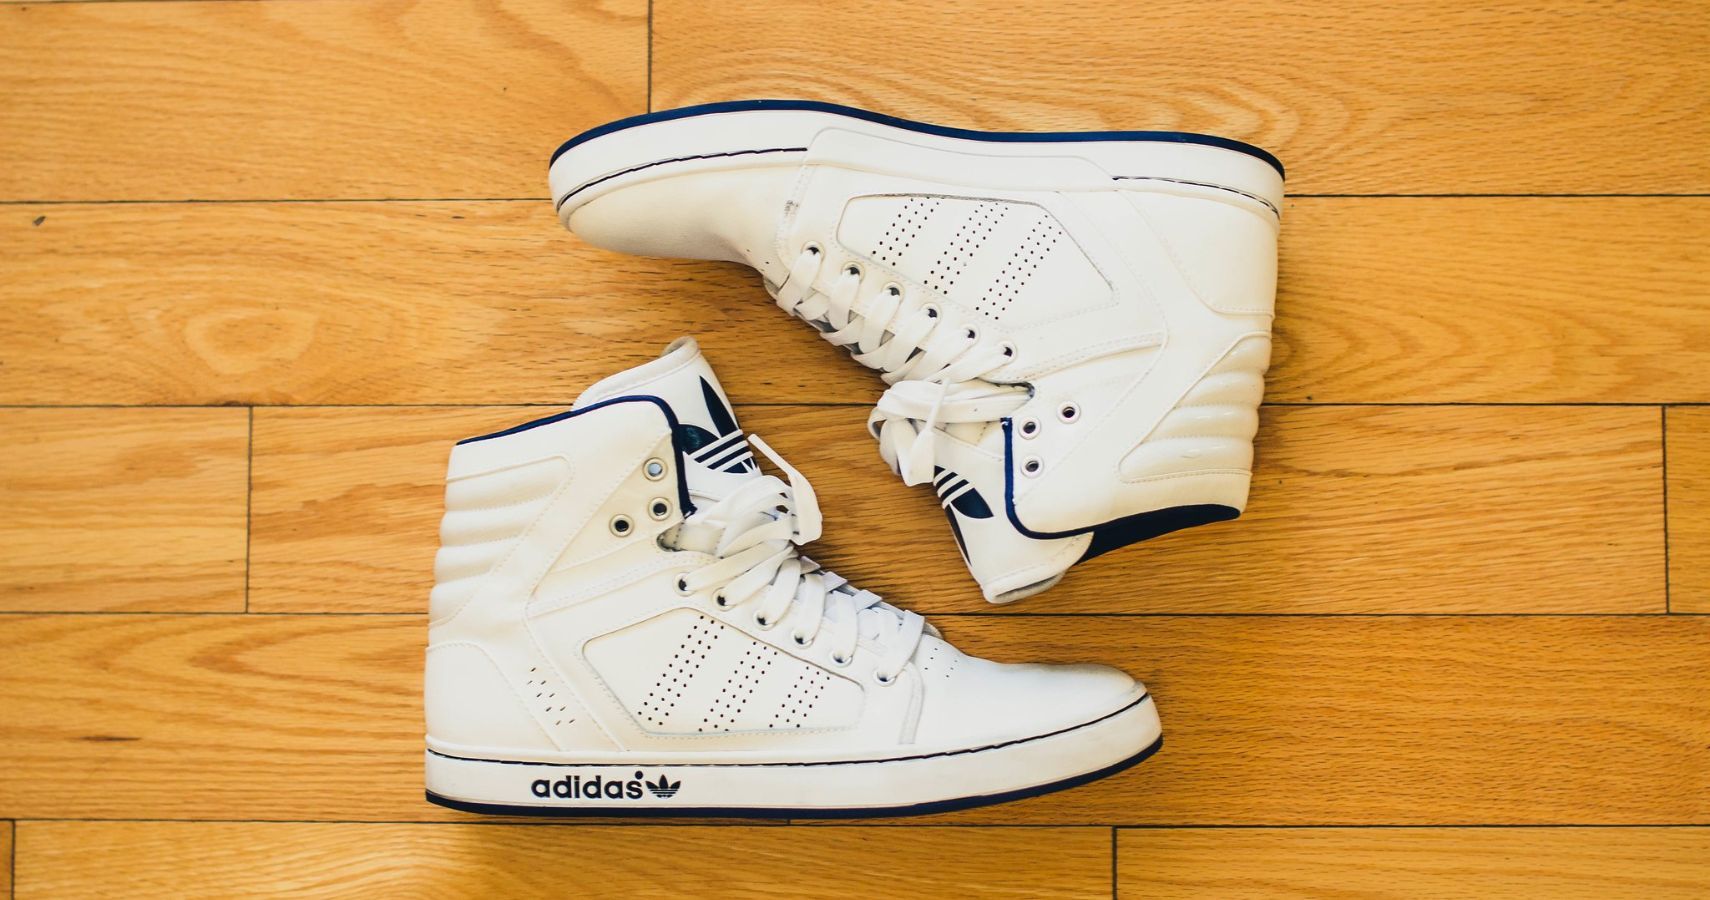 Adidas Retro Sneakers High Top Sky Rush Blue Leather Shoes Mens 9 US NWT |  eBay